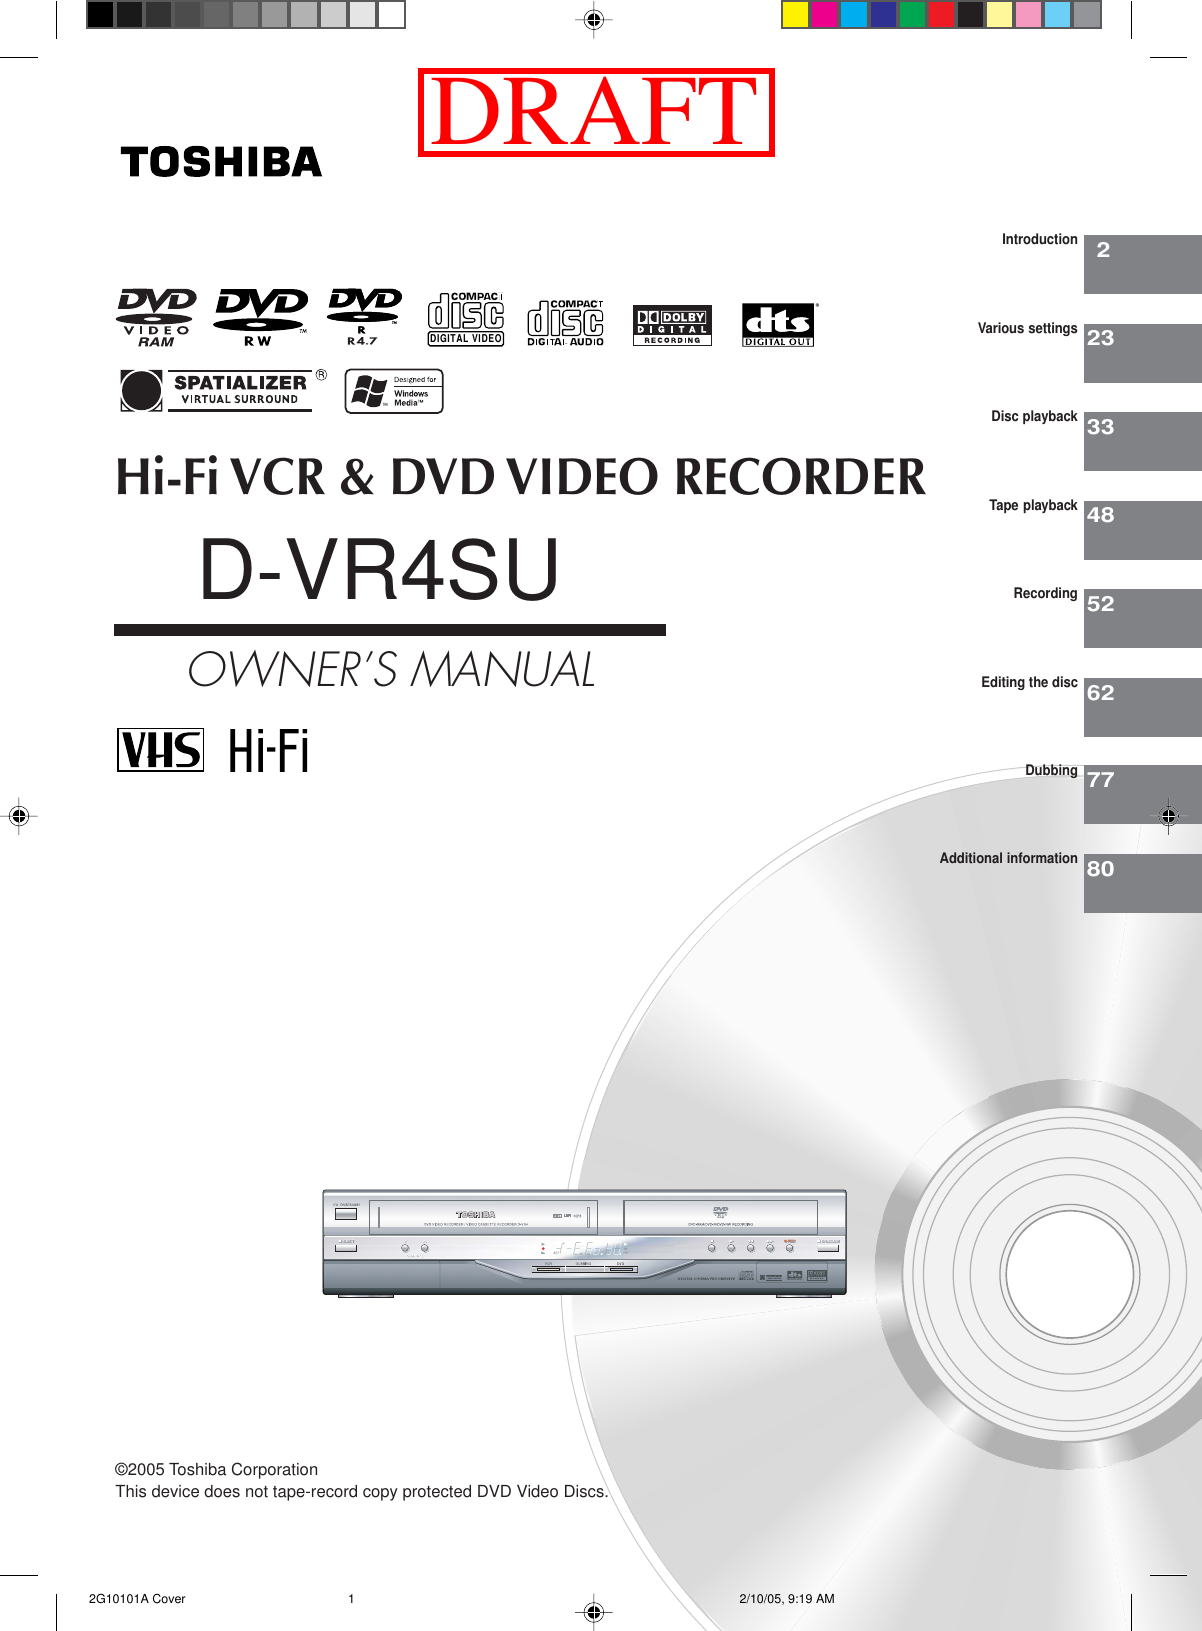 Hi-Fi VCR &amp; DVD VIDEO RECORDERD-VR4SUOWNER’S MANUAL22333485262IntroductionVarious settingsDisc playbackTape playbackRecordingEditing the discDIGITAL VIDEO©2005 Toshiba Corporation7780DubbingAdditional informationThis device does not tape-record copy protected DVD Video Discs. 2G10101A Cover 2/10/05, 9:19 AM1DRAFT